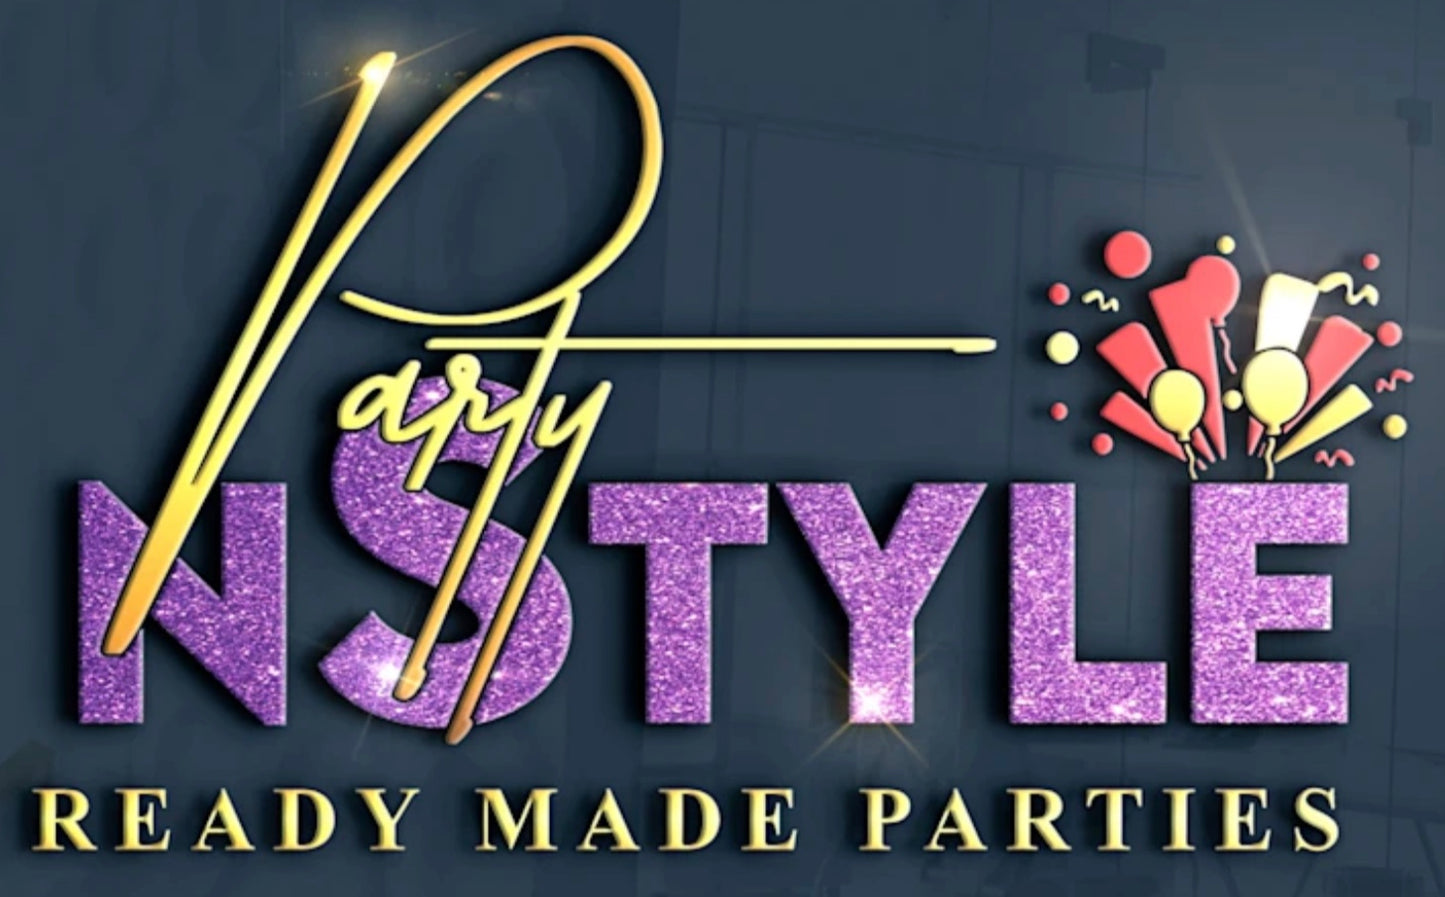 Party nStyle Gift Card